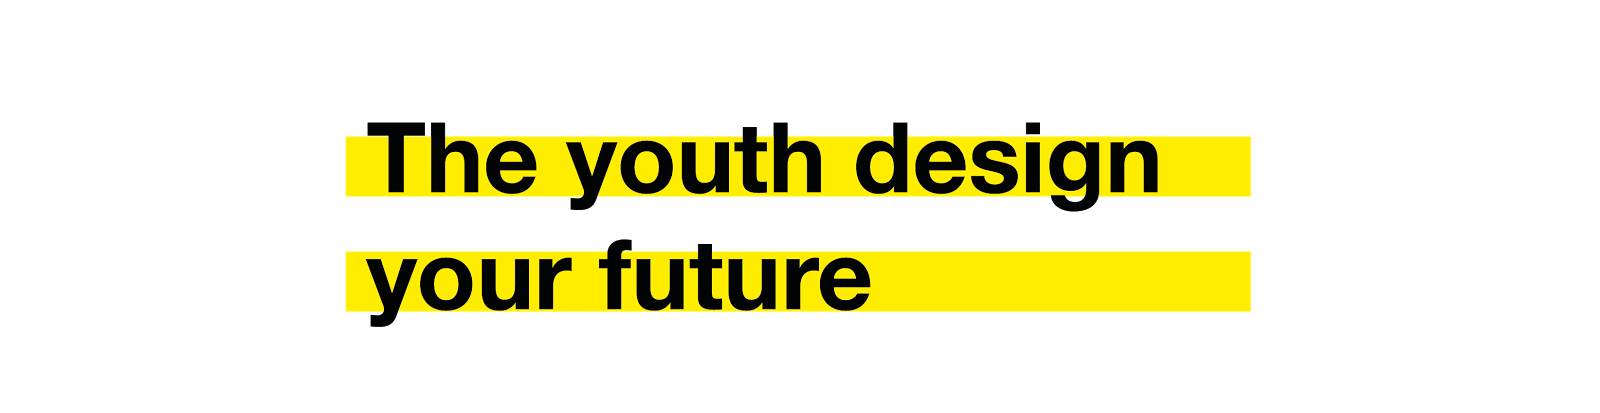 The Youth design your future